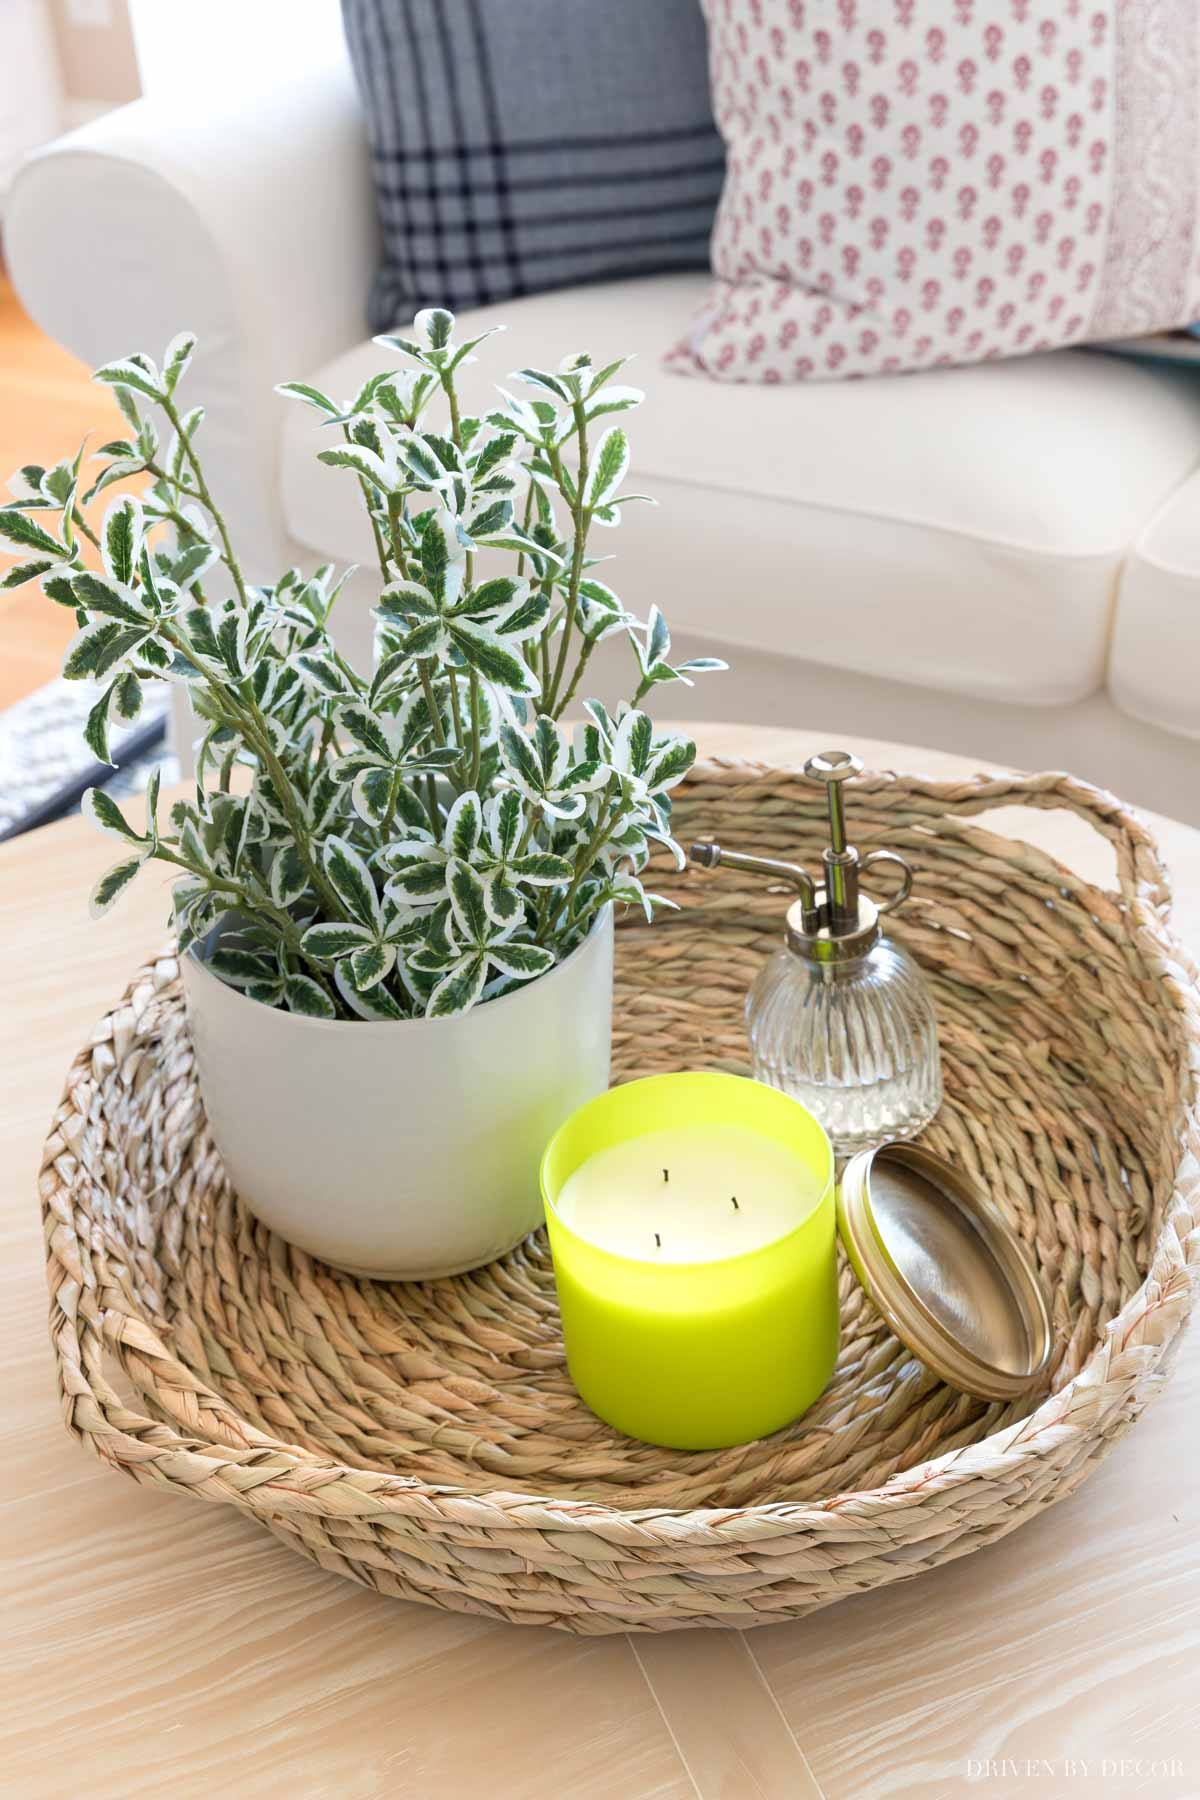 Such an affordable round woven tray! And I love this candle too!